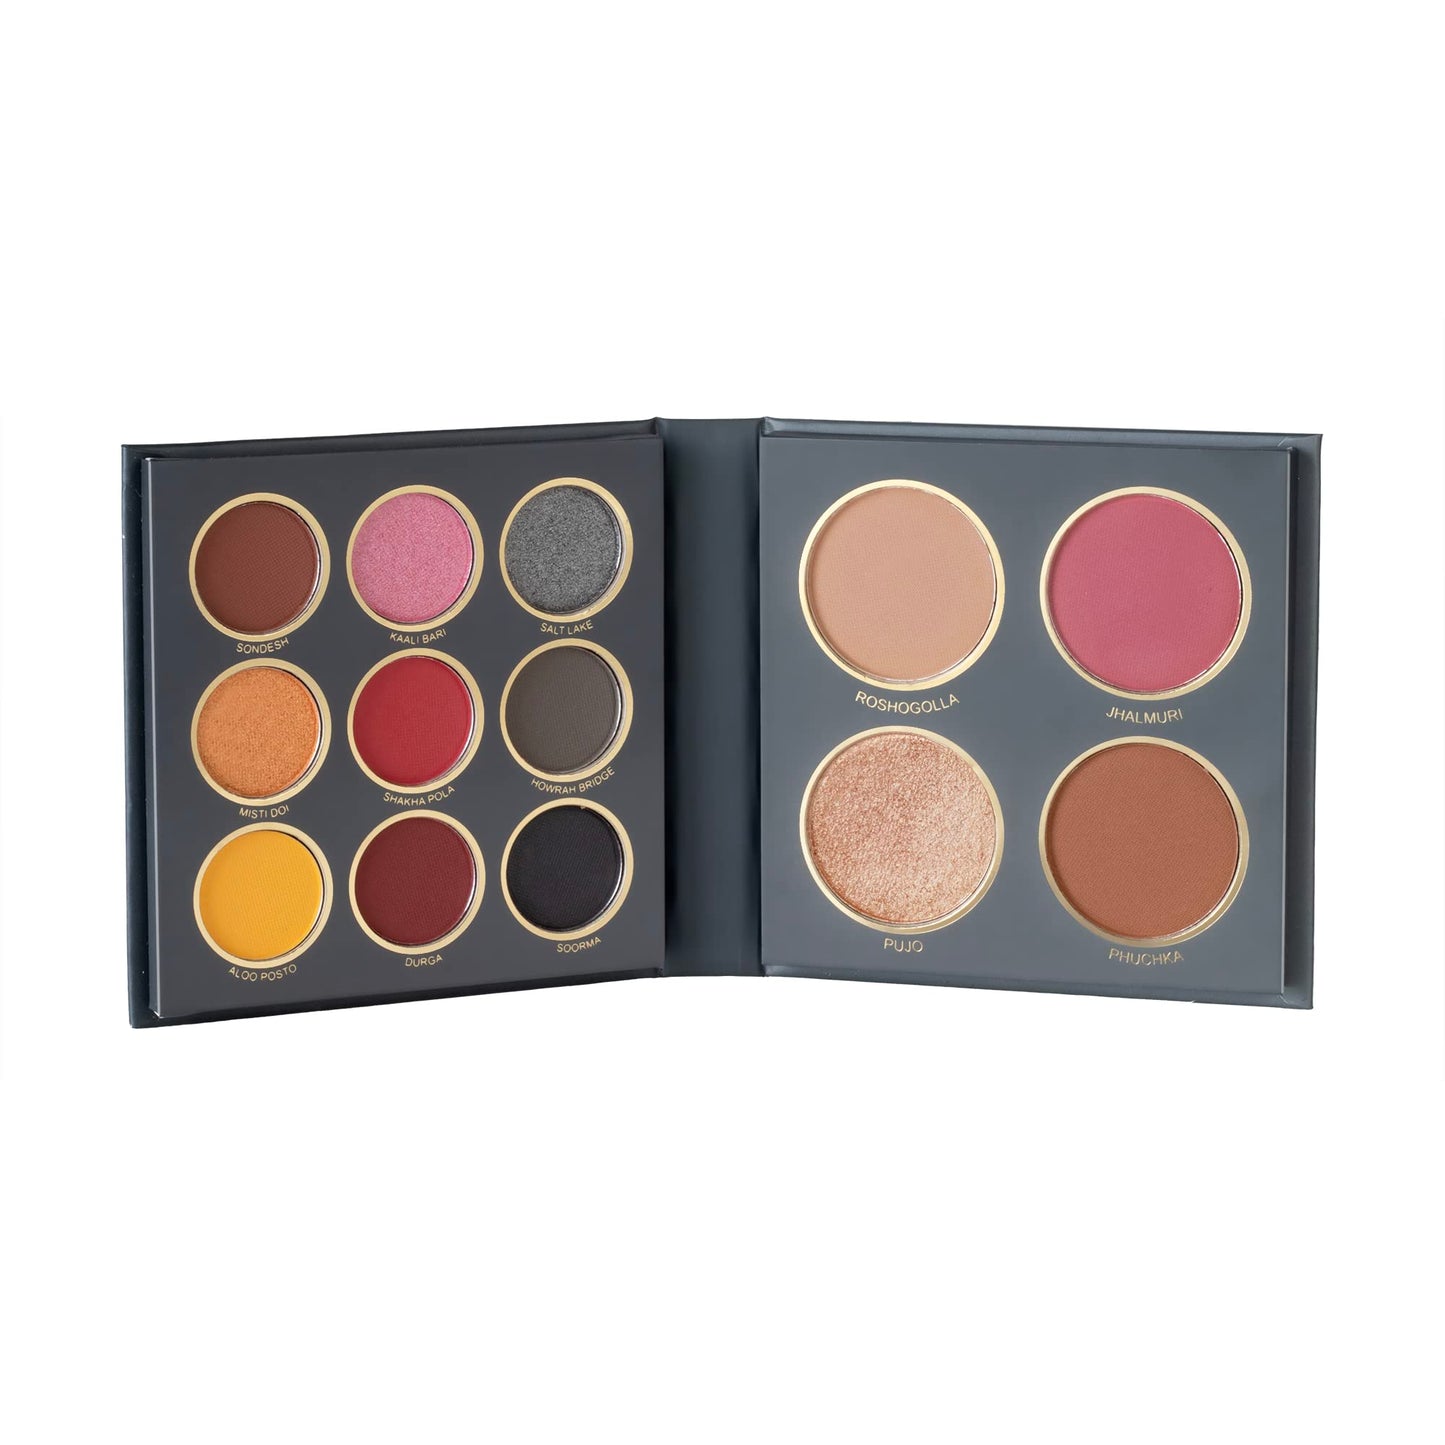 MARS City Paradise 9 Color Eyeshadows With Highlighter, Blusher, Bronzer & Face Powder Makeup Kit 16G |Shades are Extremely Soft To Touch |KolKata-04